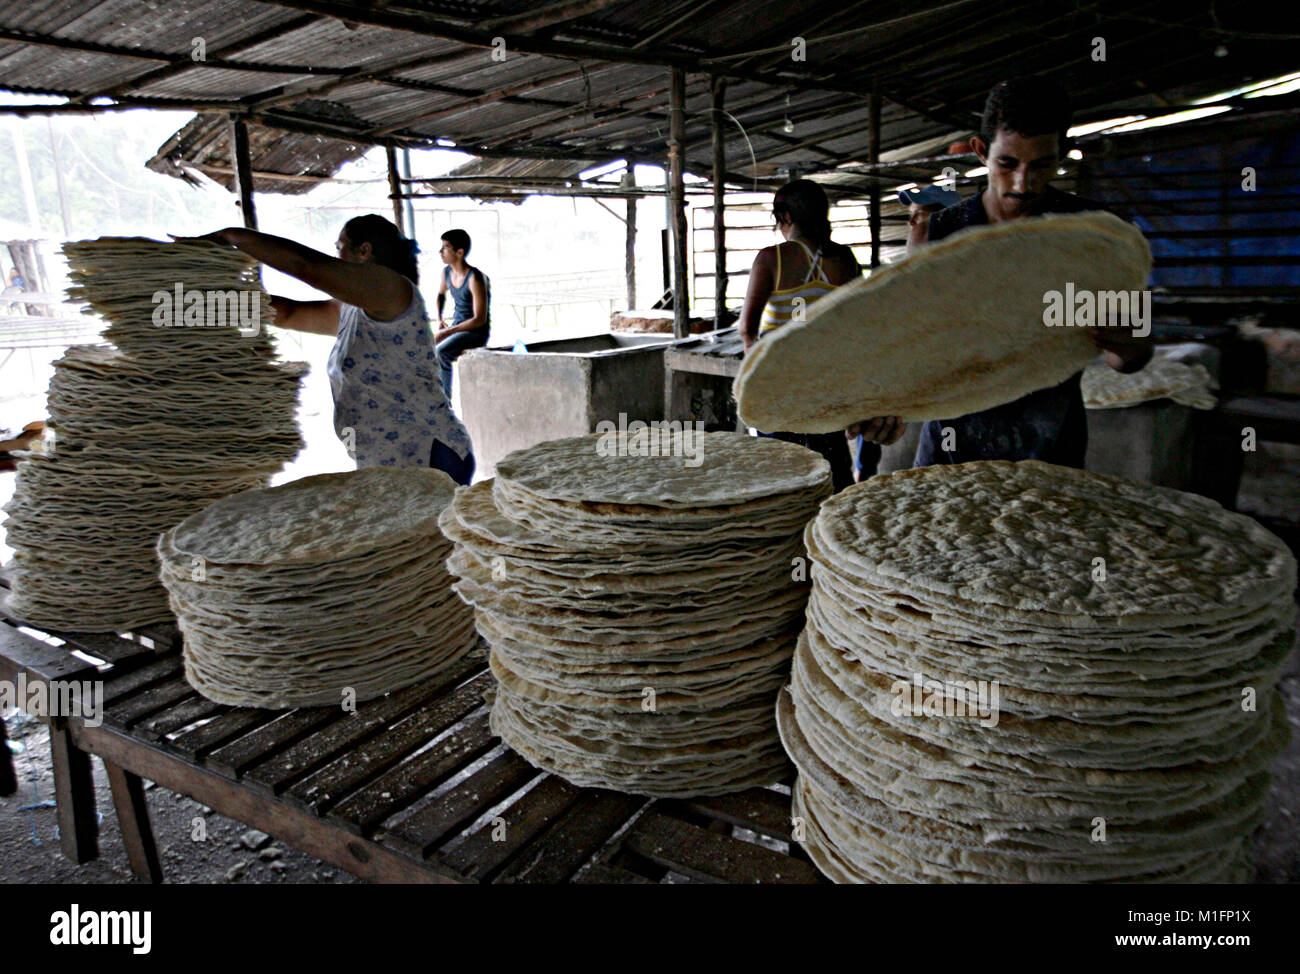 December 8, 2012 - Maturin, Monagas, Venezuela - december 09, 2012.  Workers collect the cakes already dried and ready for sale. The casabe or cazabe is part of the tradition of the Venezuelan as its indigenous people elaborated it and it is known as the Venezuelan bread. In the city of Maturâ€™n, Monagas state. Venezuela .foto: Juan Carlos Hernandez (Credit Image: © Juan Carlos Hernandez via ZUMA Wire) Stock Photo